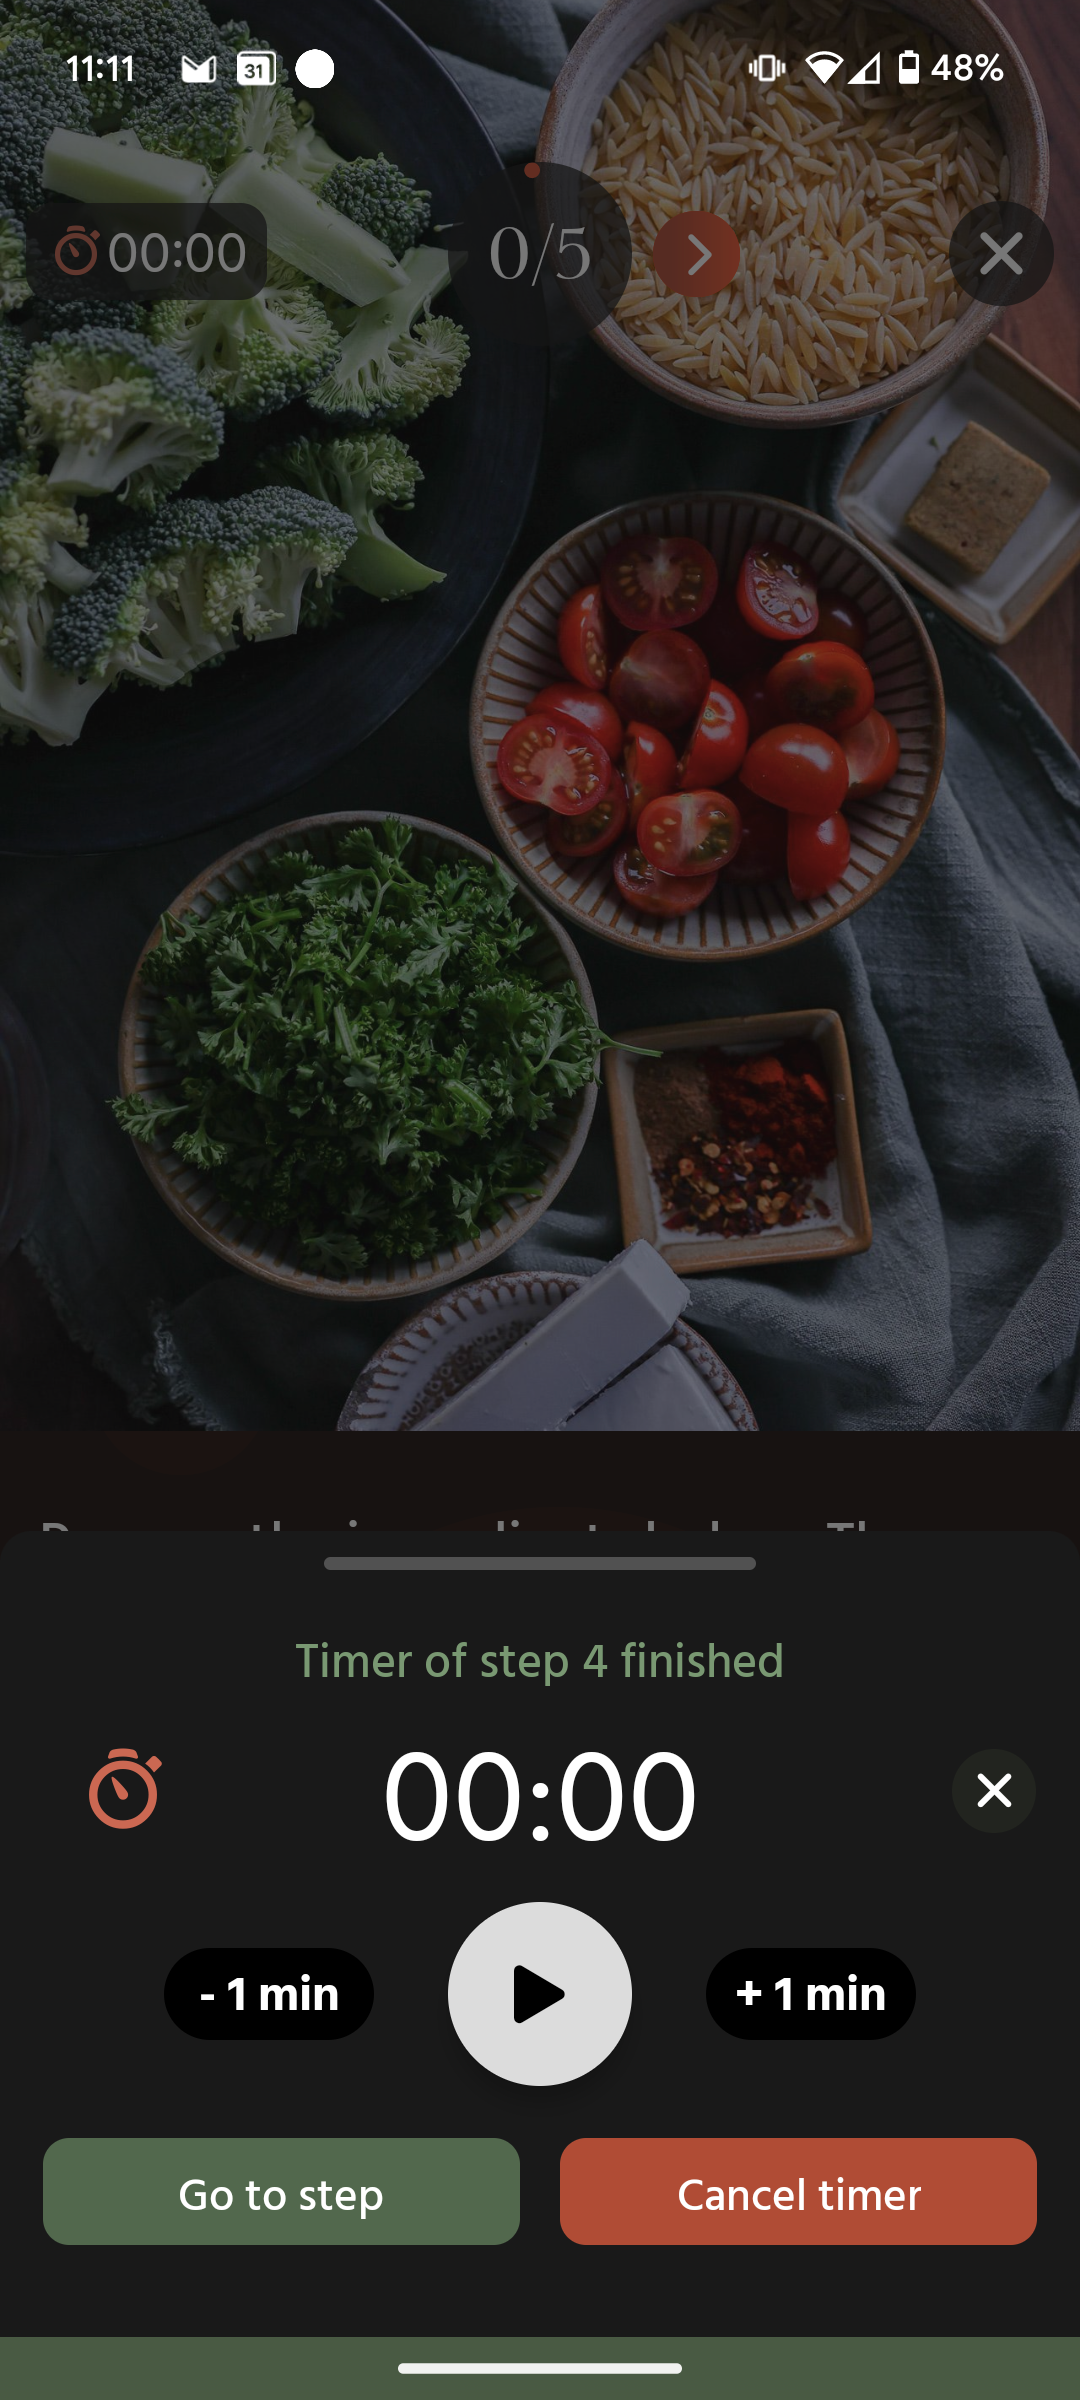 The Pick Up Limes app displaying a timer